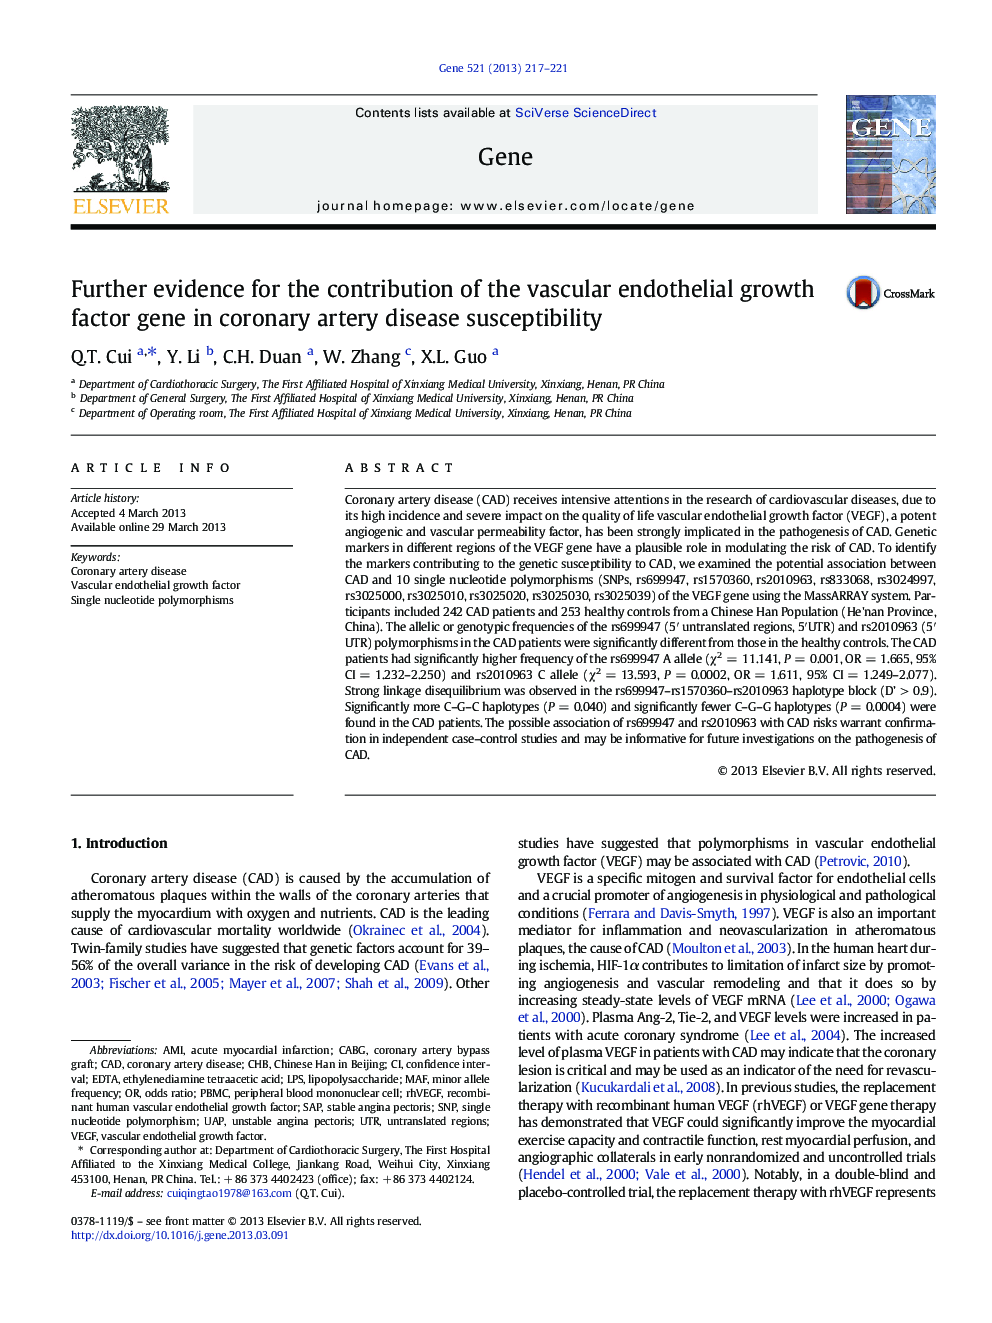 Further evidence for the contribution of the vascular endothelial growth factor gene in coronary artery disease susceptibility